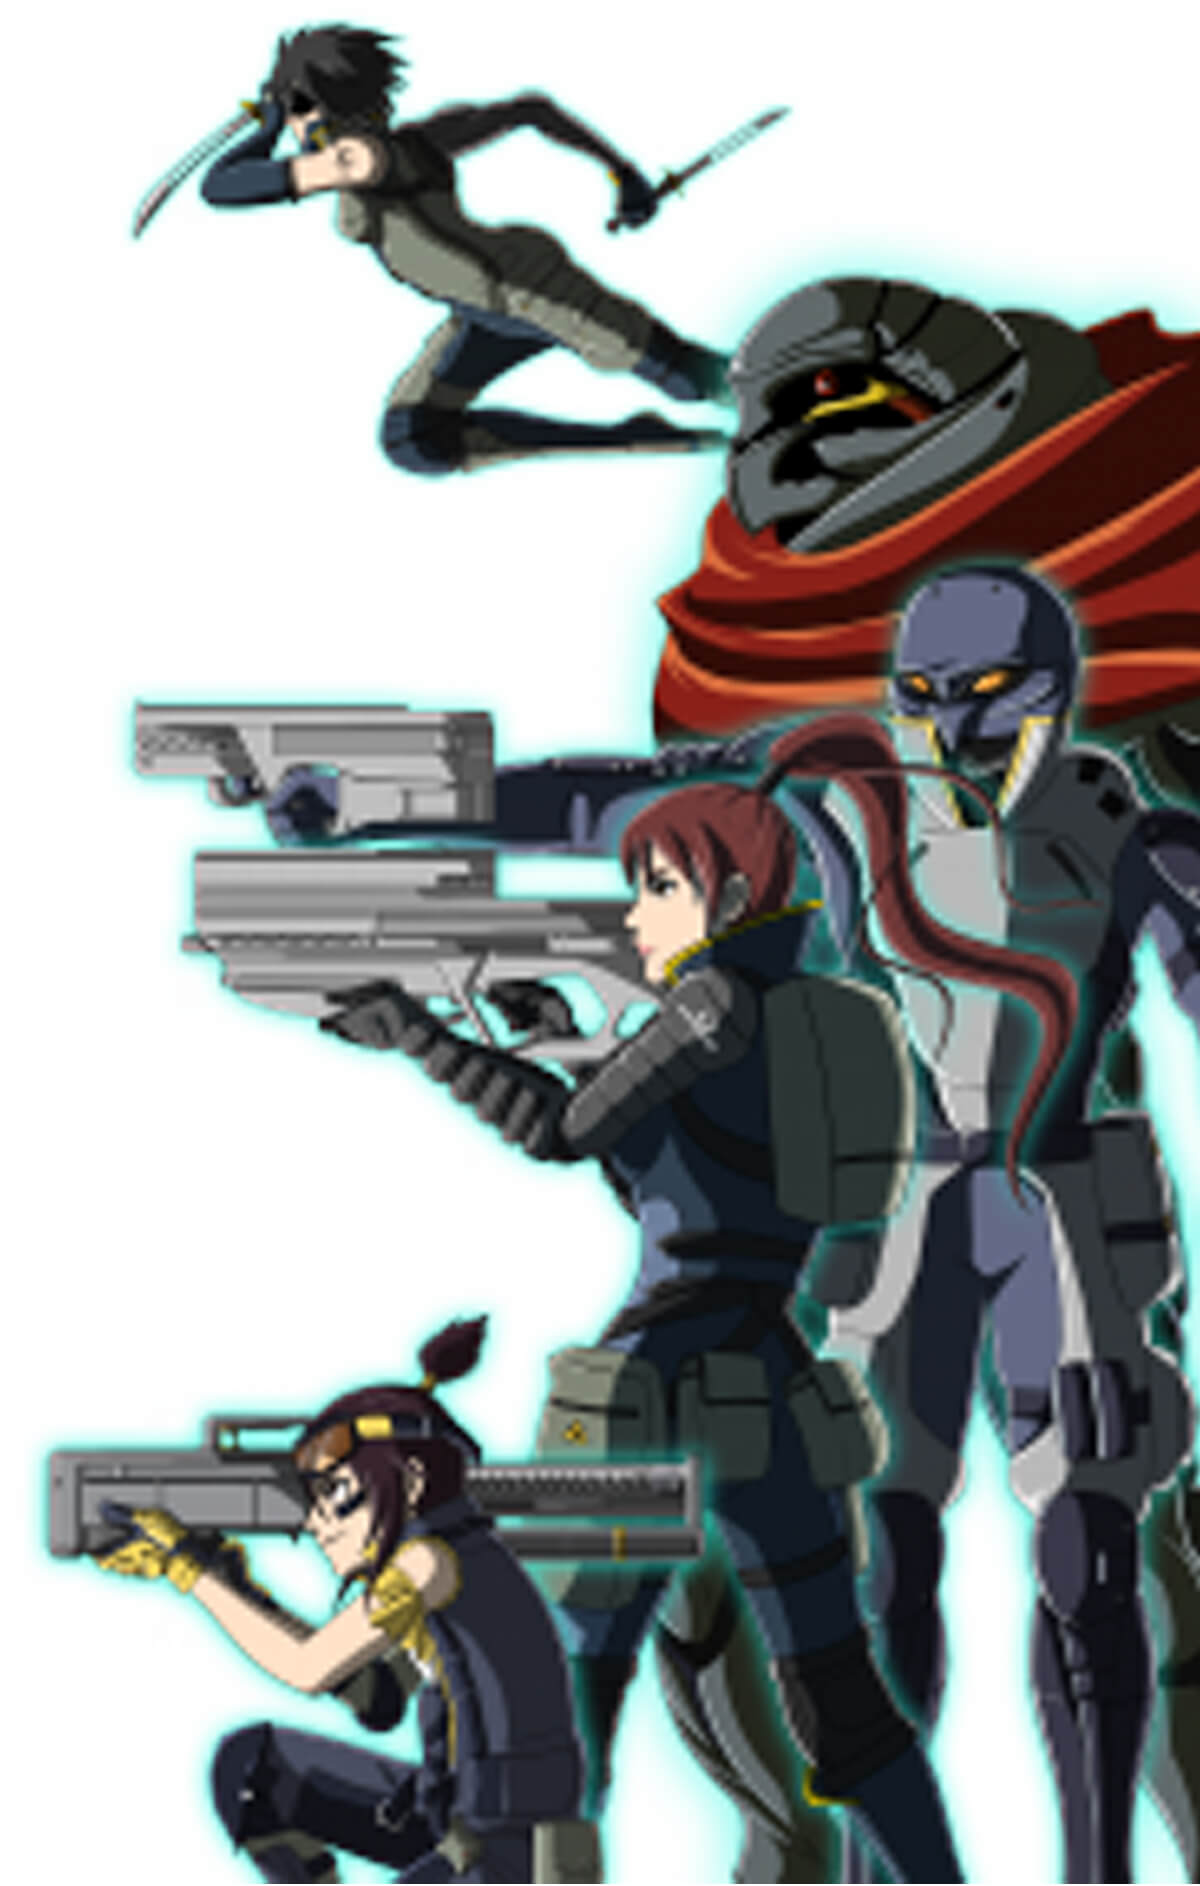 Five anime-style characters seen from the side aiming weapons or leaping toward the left with daggers